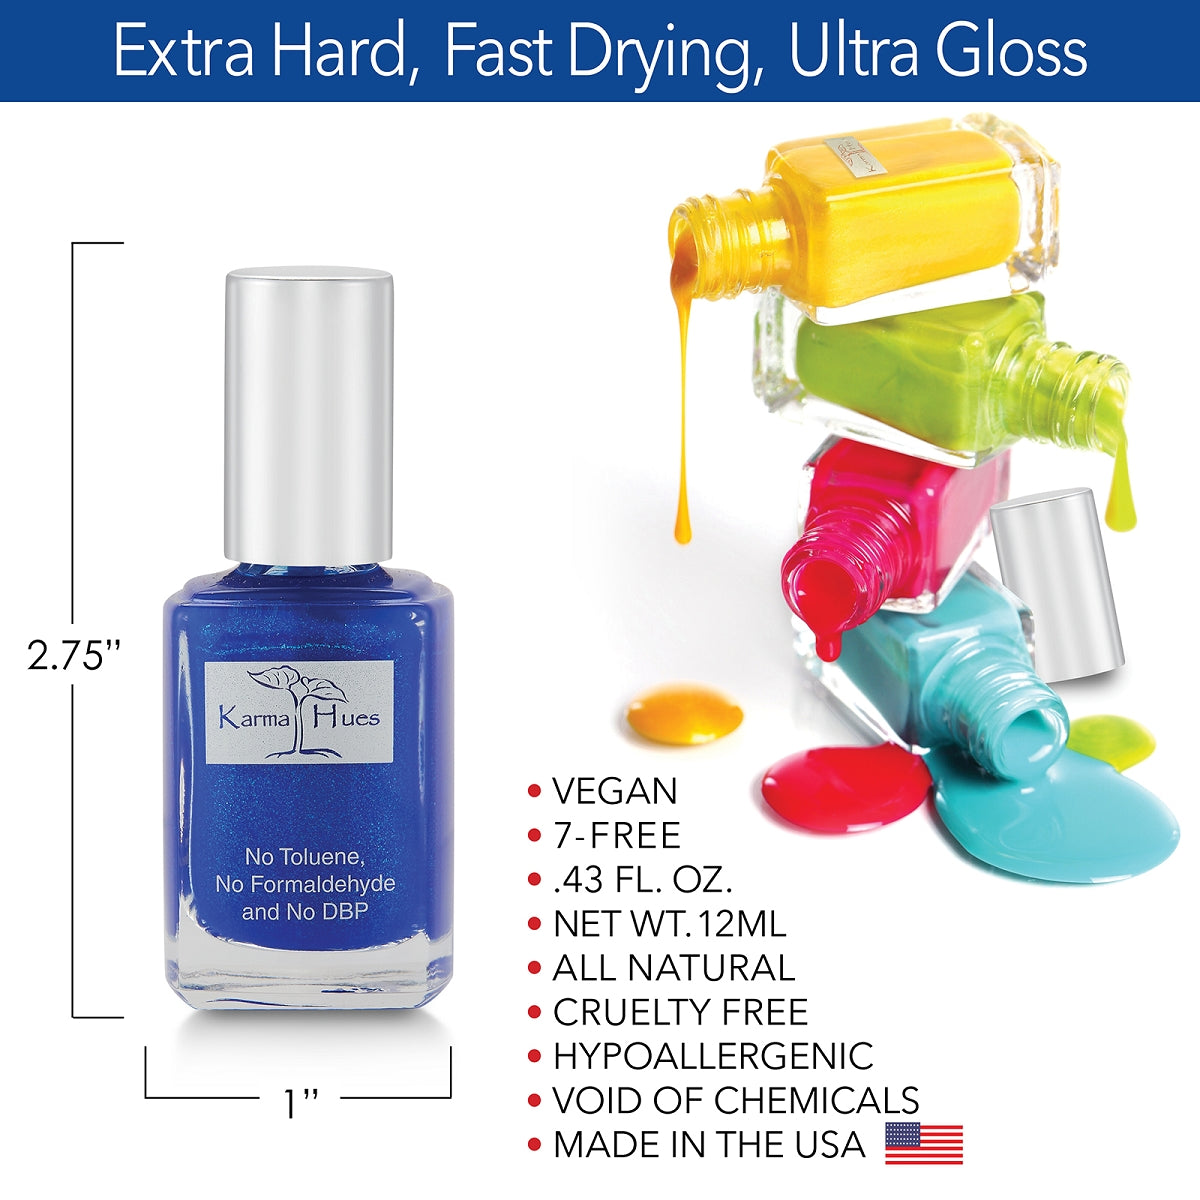 Universal Appeal - Nail Polish; Non-Toxic, Vegan, and Cruelty-Free (#374)